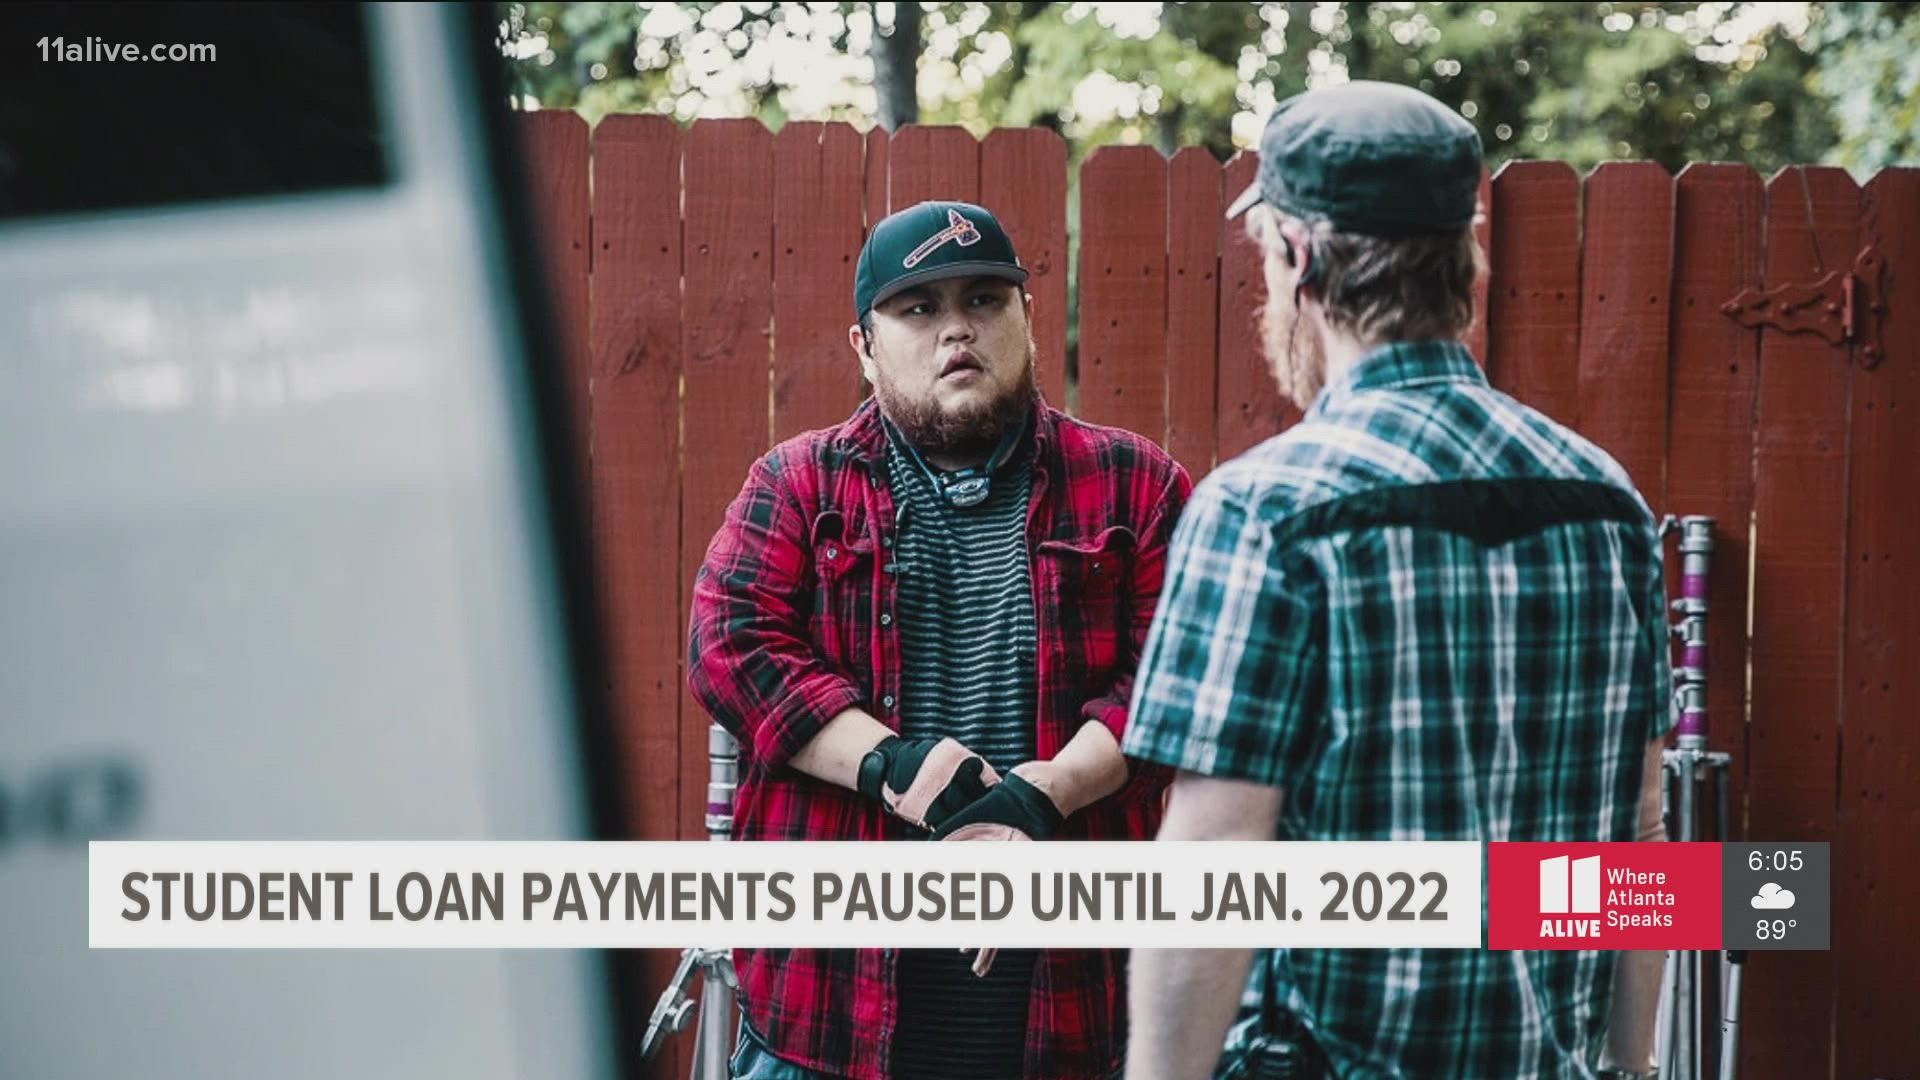 Atlanta filmmaker, Jeremy Thao, said the pause on student loans repayment helped him during the pandemic when he lost film work.